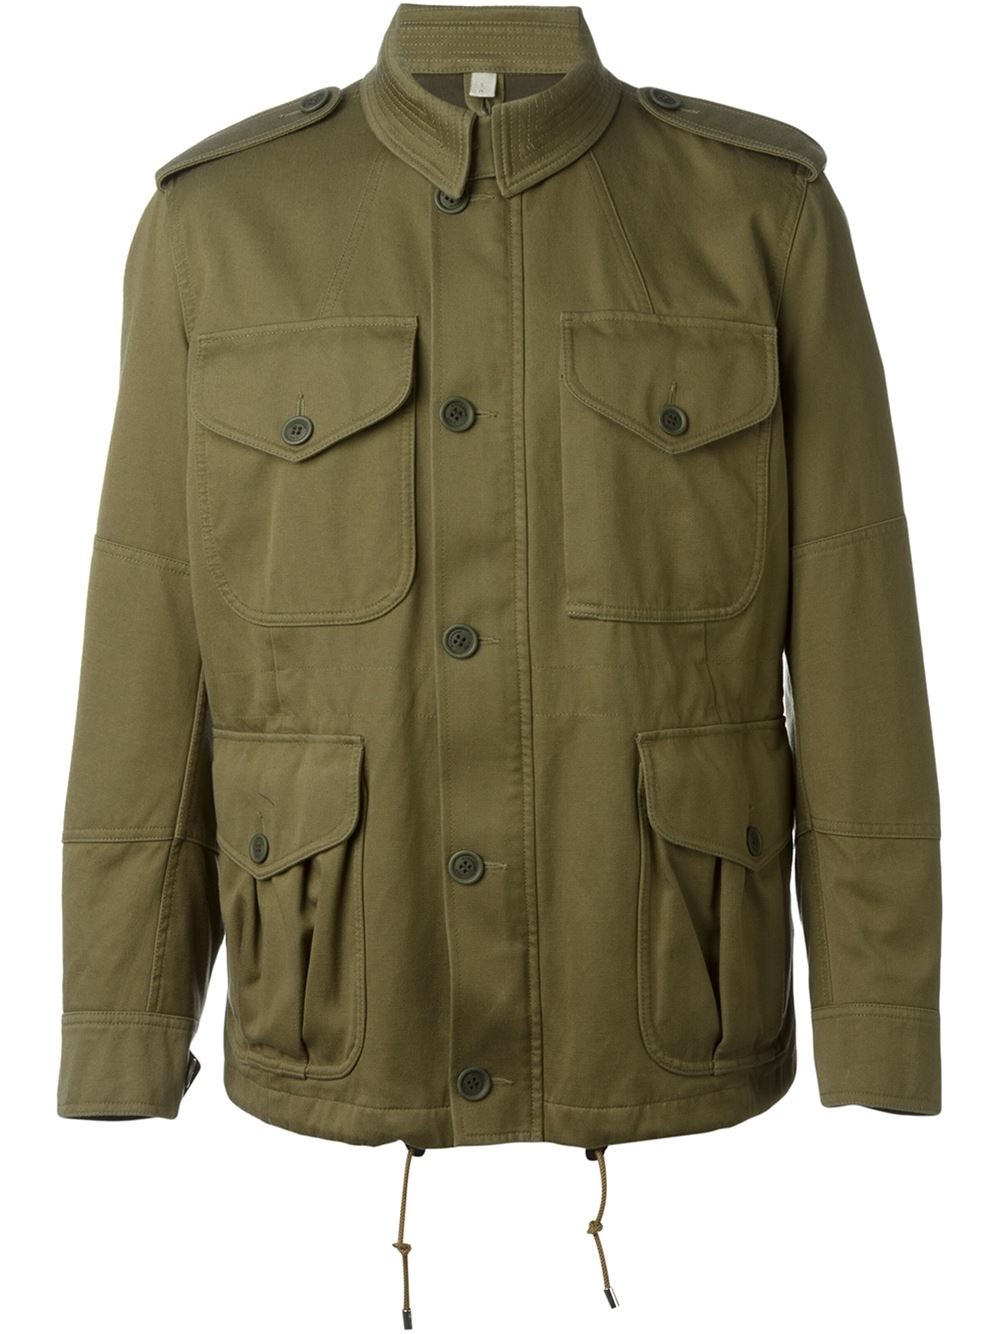 burberry green military coat Cheaper Than Retail Price> Buy Clothing,  Accessories and lifestyle products for women & men -